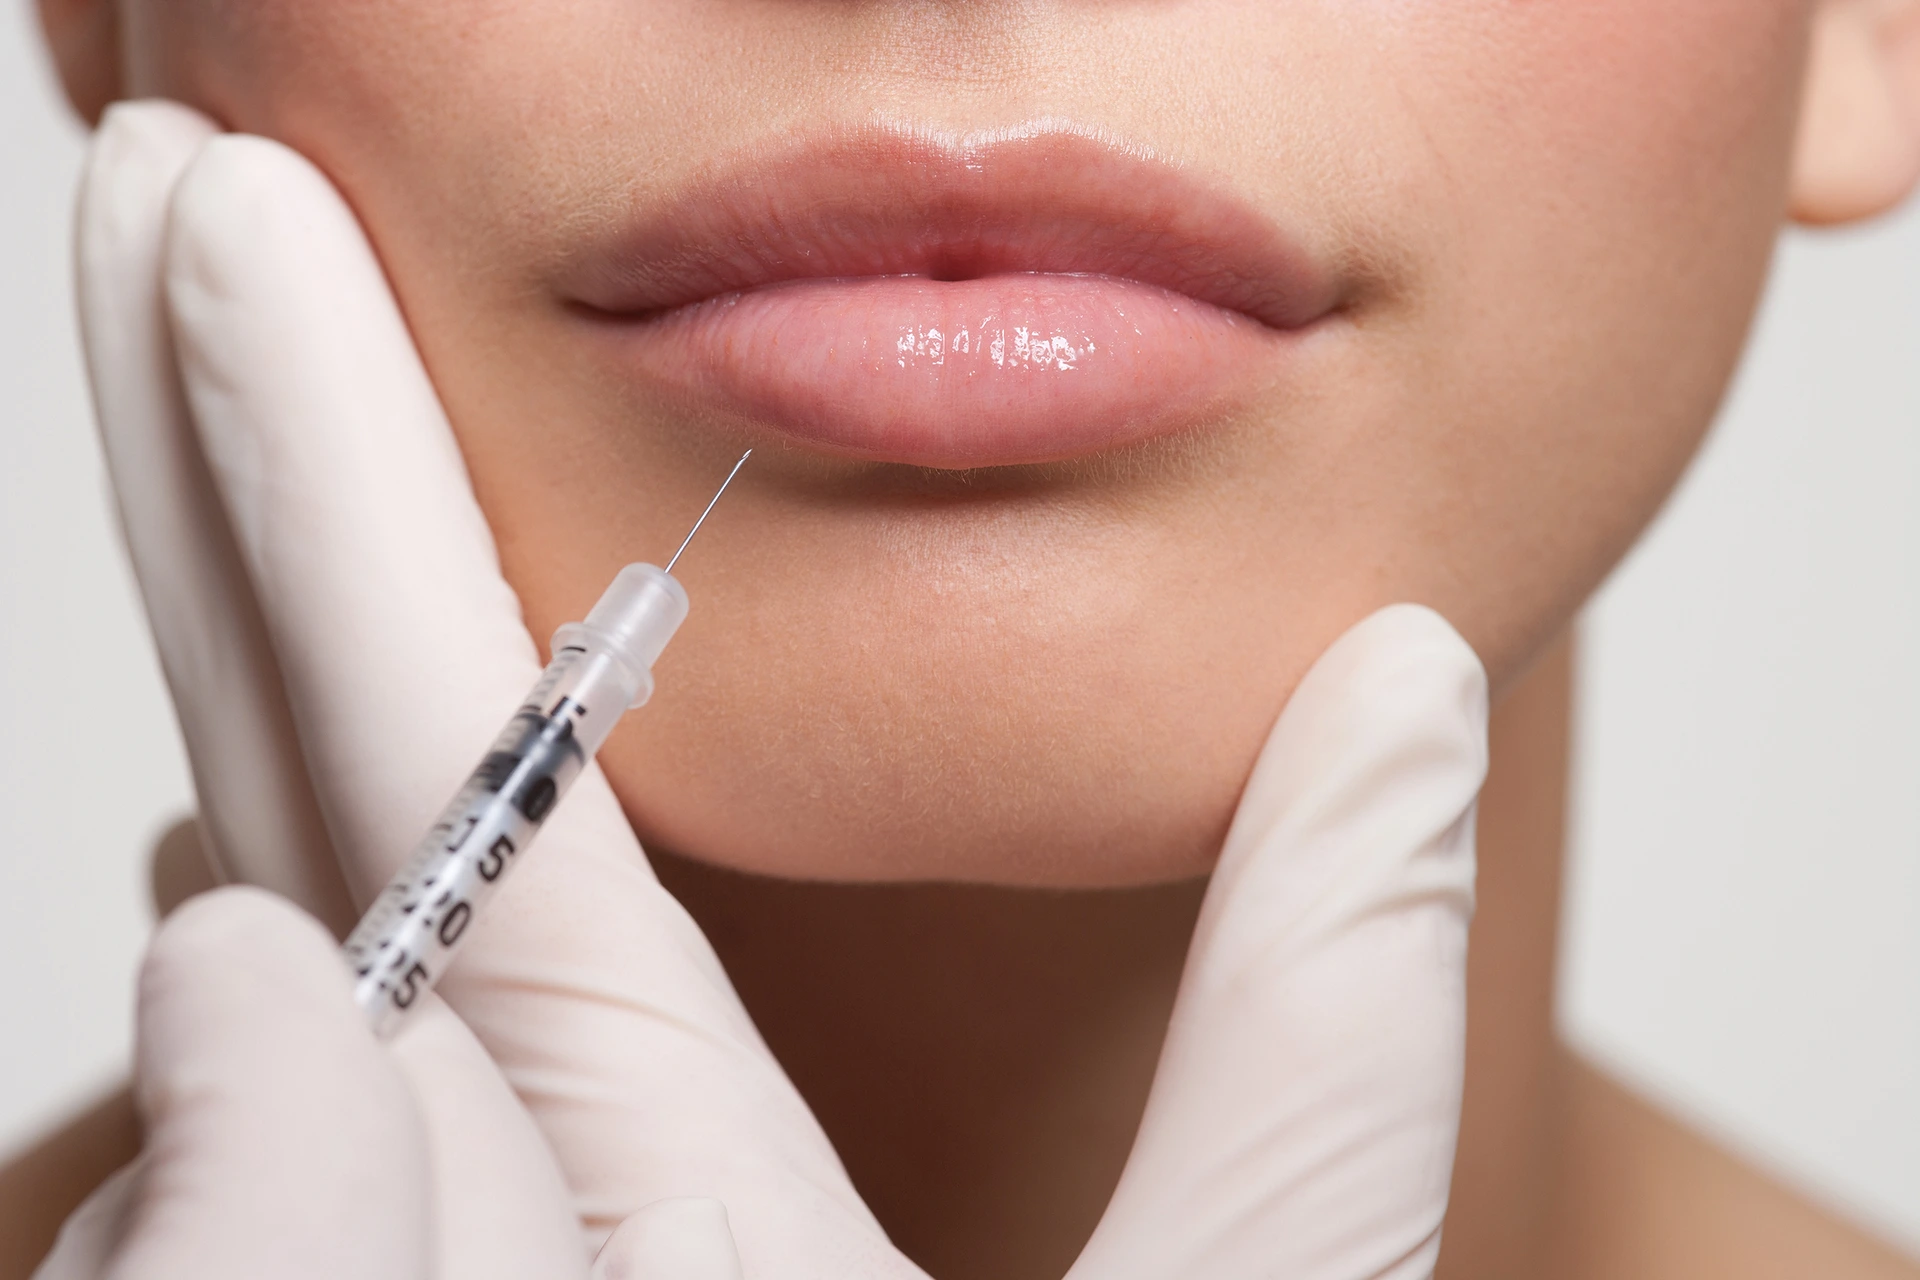 Cupids Bow Lip Filler: A Guide To Perfect Lips